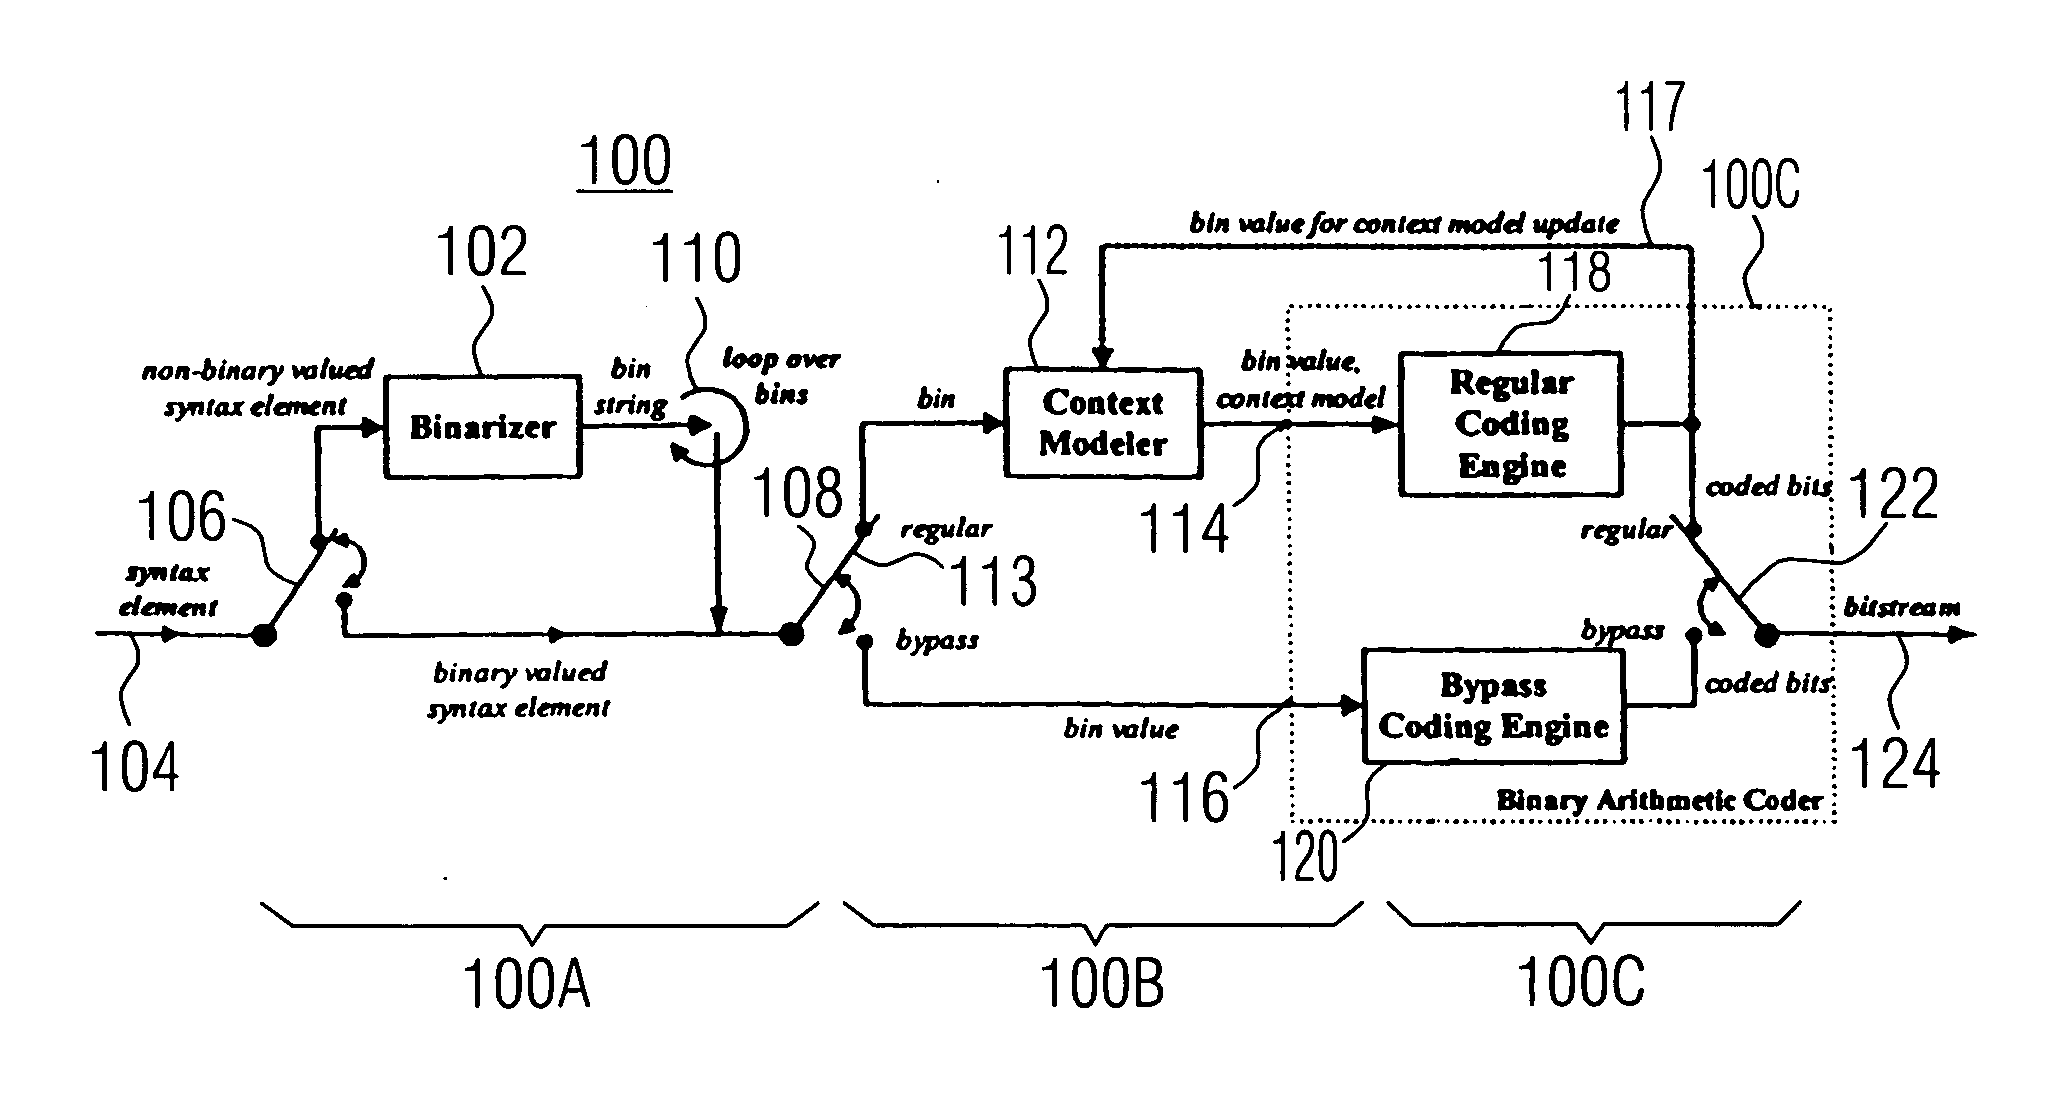 Coding of a syntax element contained in a pre-coded video signal